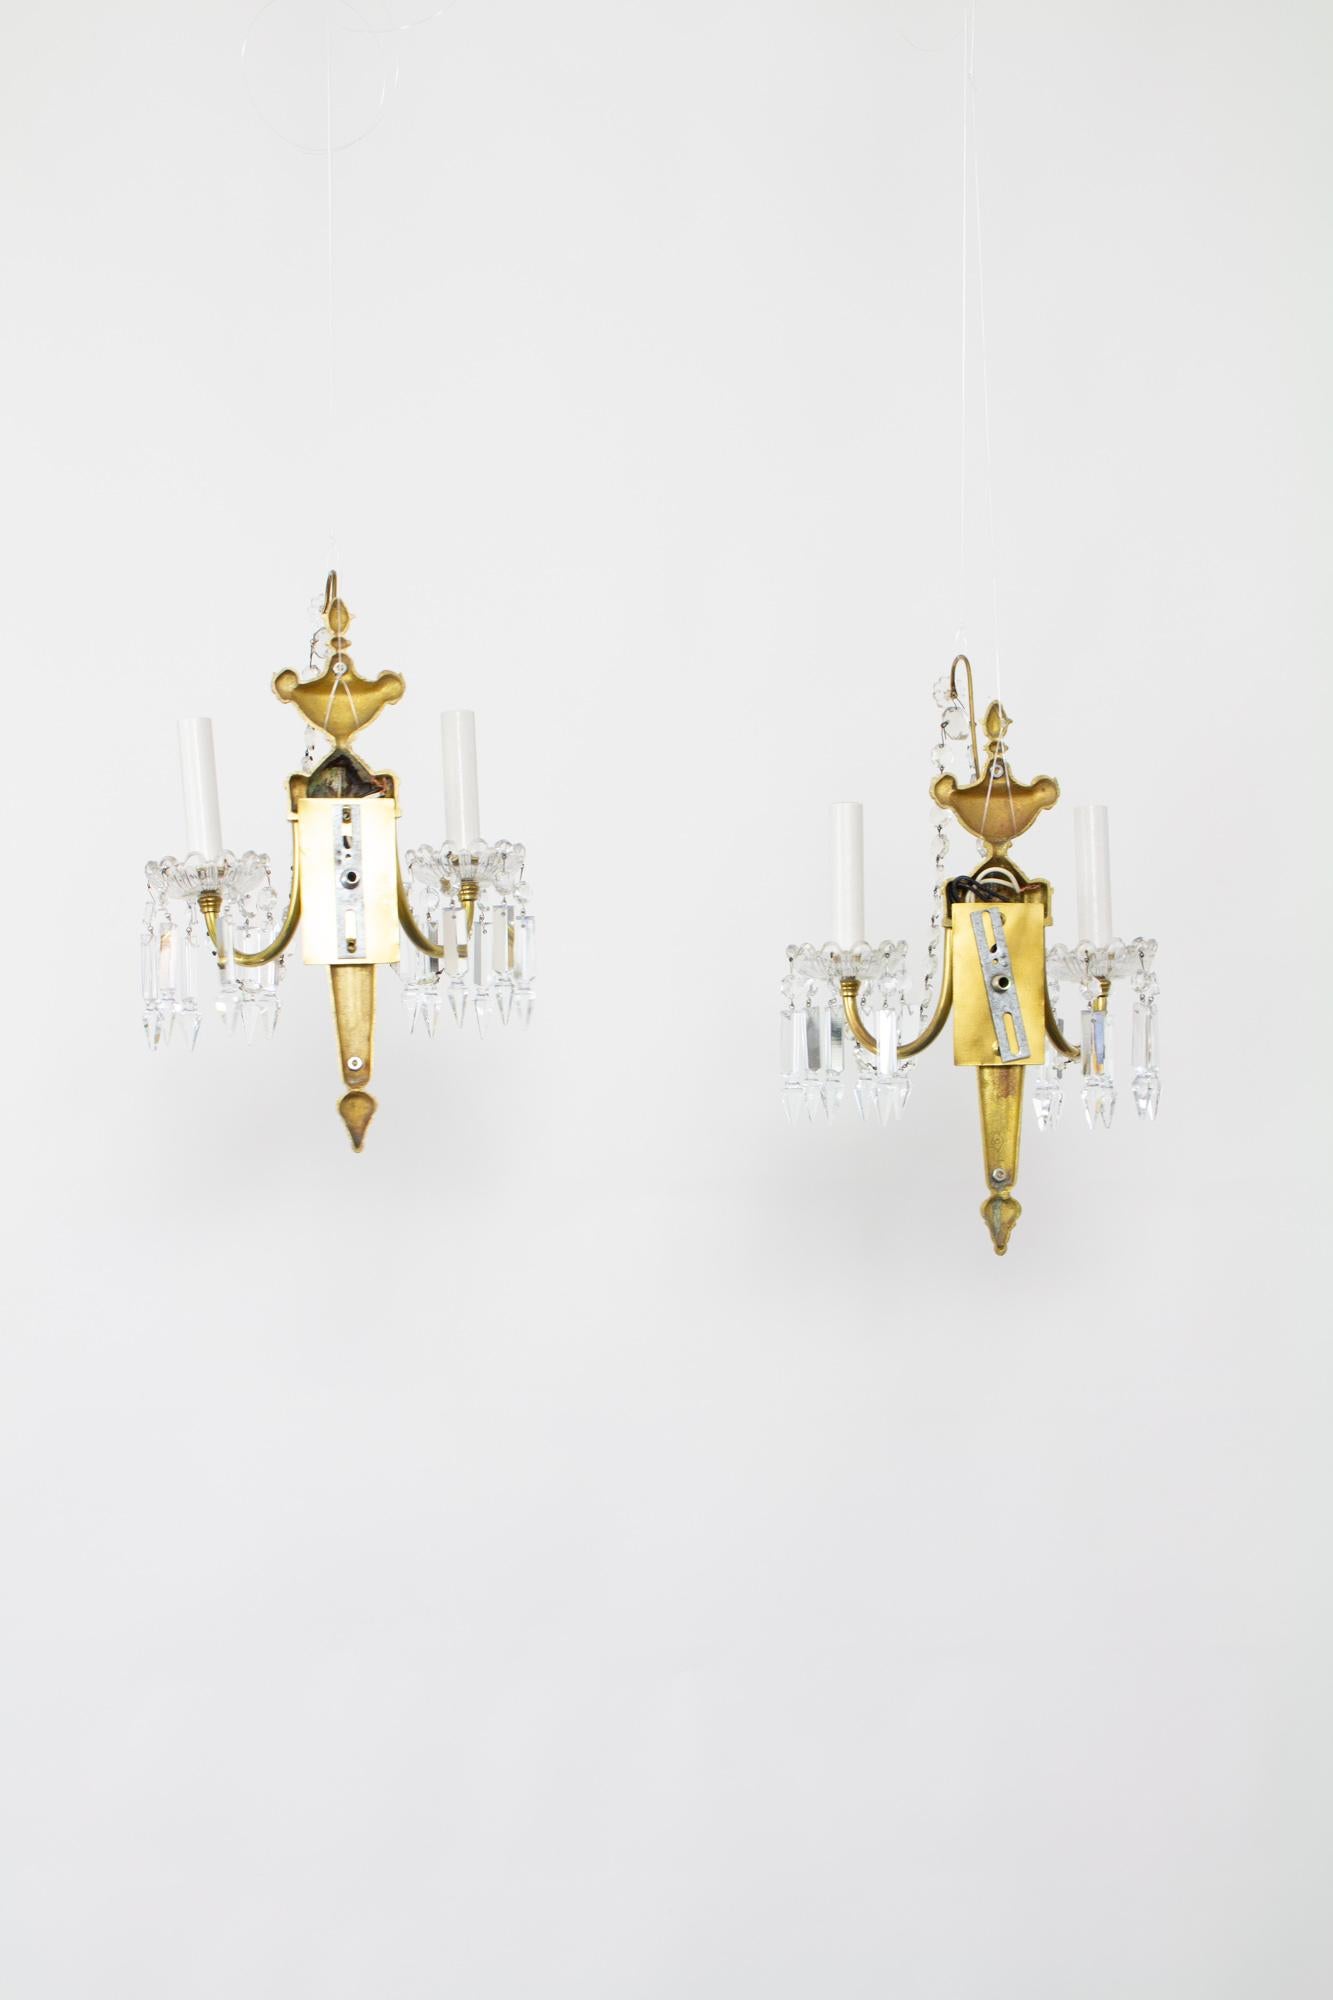 Brass S379 EF Caldwell Two Arm Neoclassical Sconces, a Pair